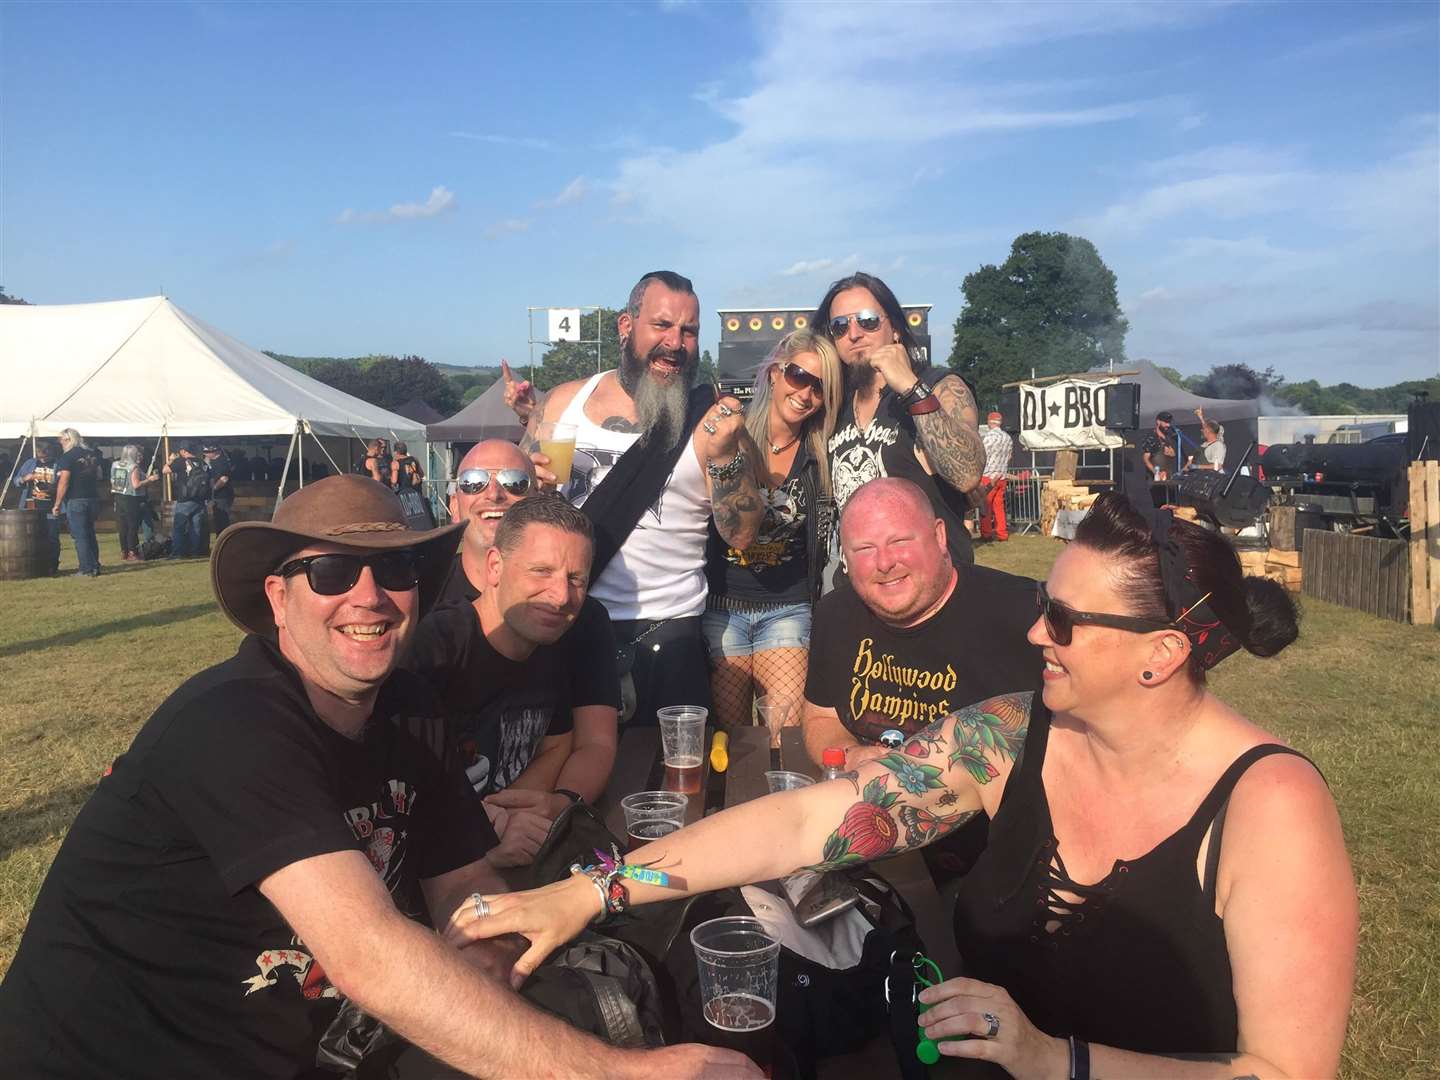 This gang of rockers from various parts of the south east were looking forwards to Black Stone Cherry